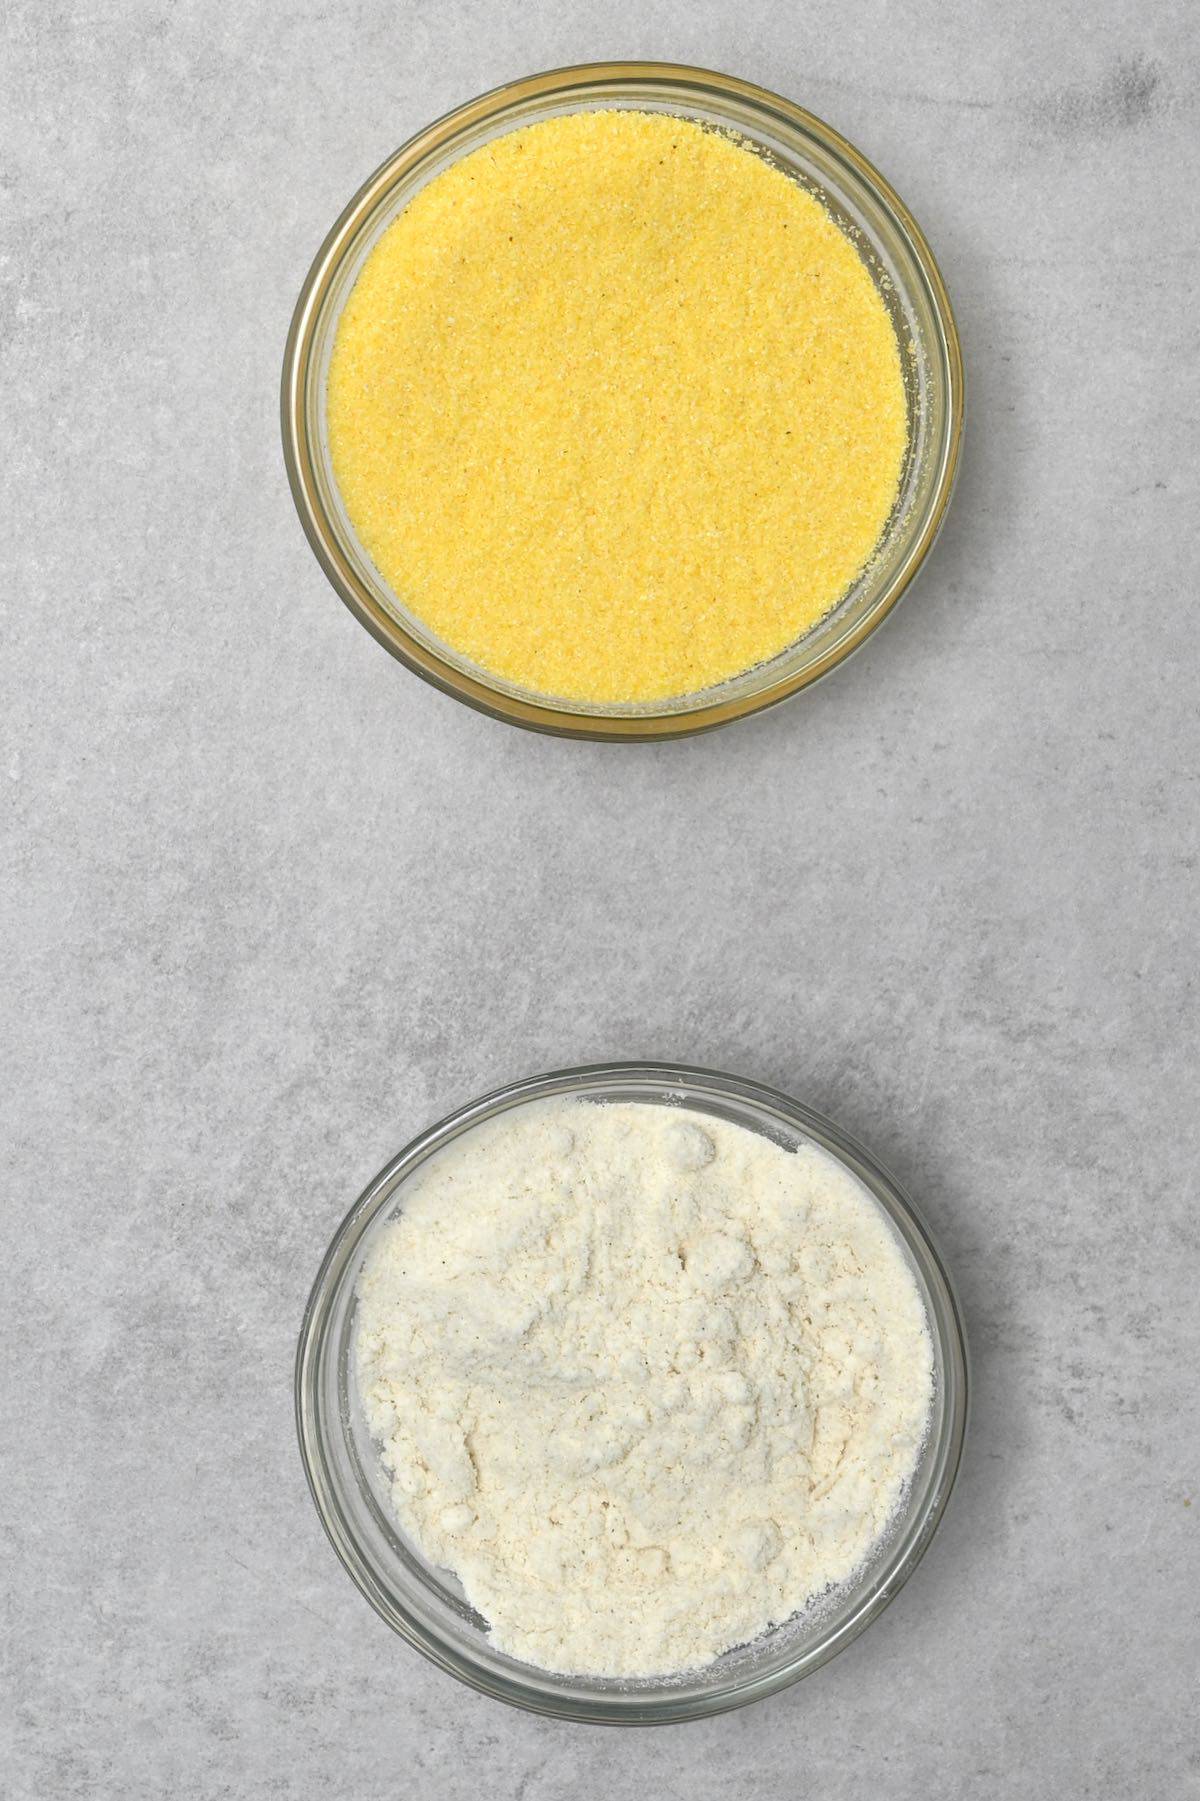 coconut flour next to cornmeal in glass bowl